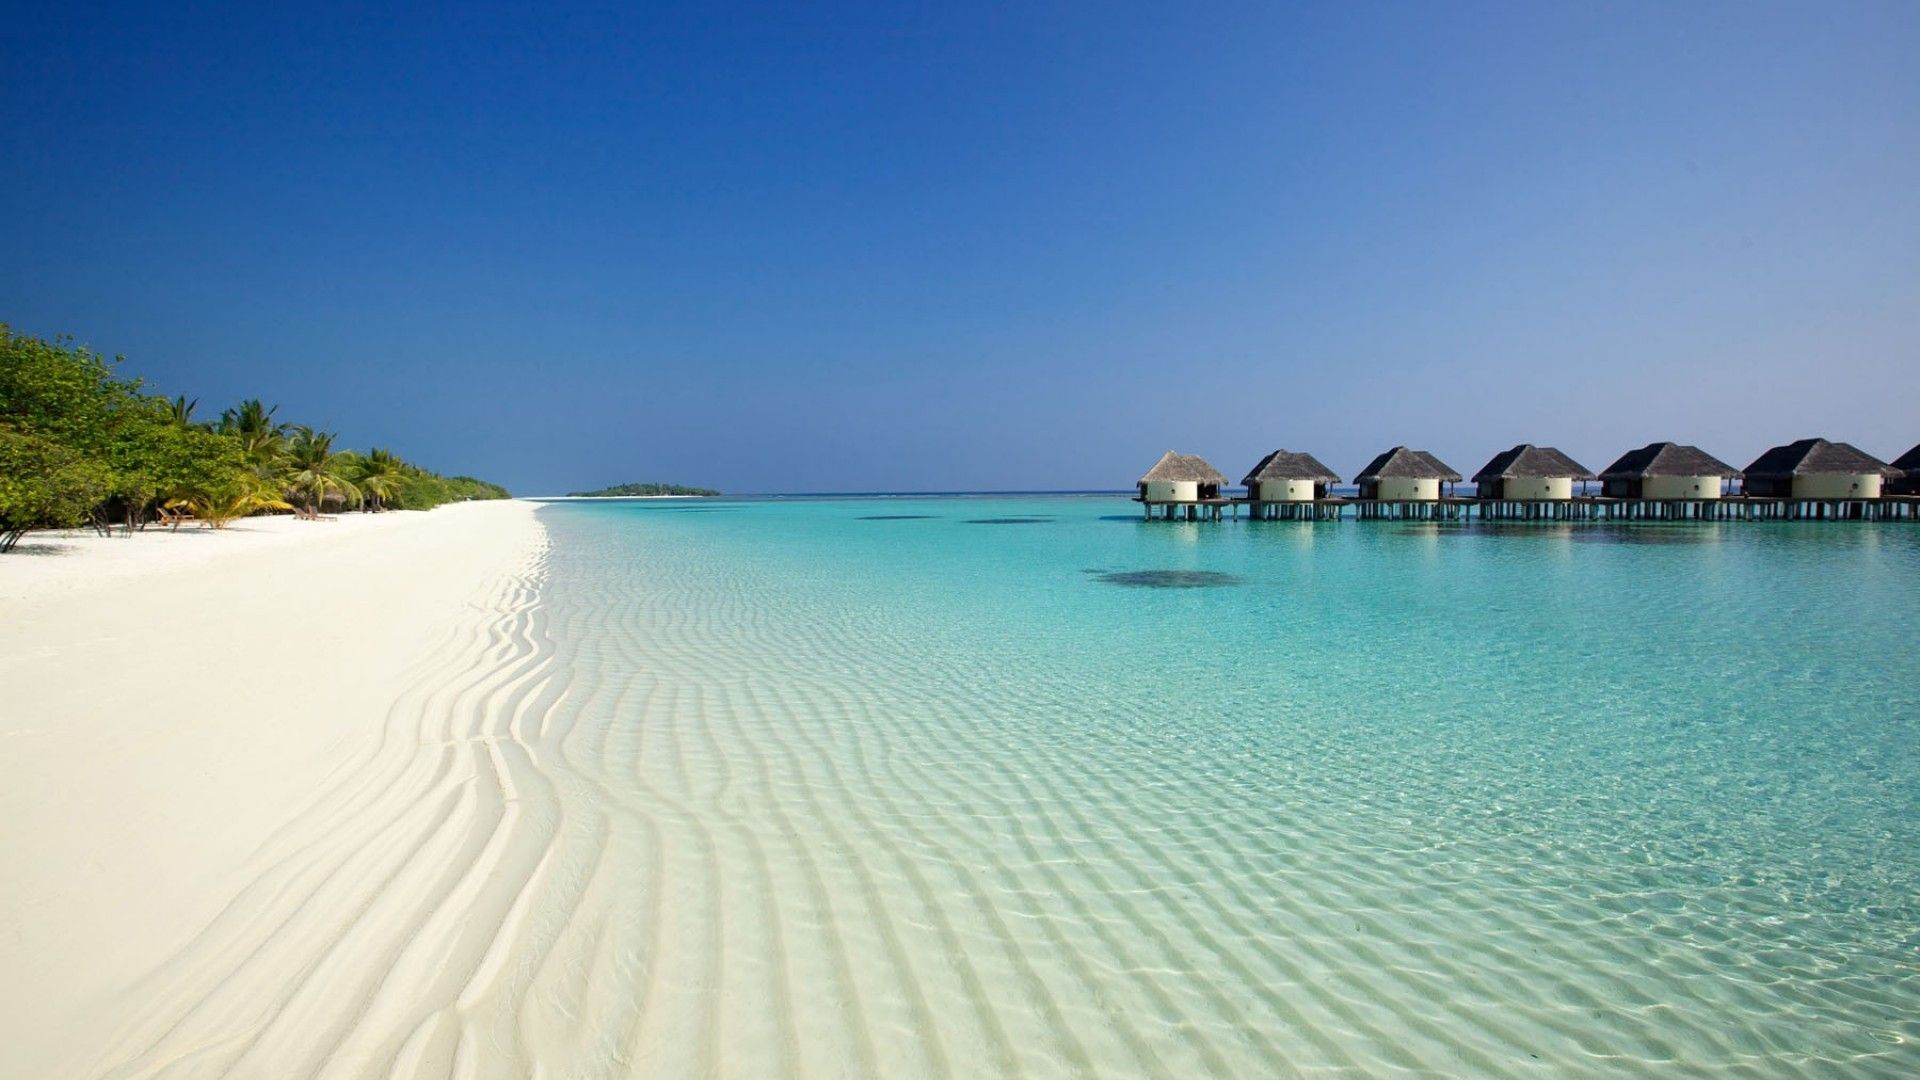 Awesome Maldives Beach Wallpaper Background. Maldives beach, Best resorts in maldives, Beach wallpaper